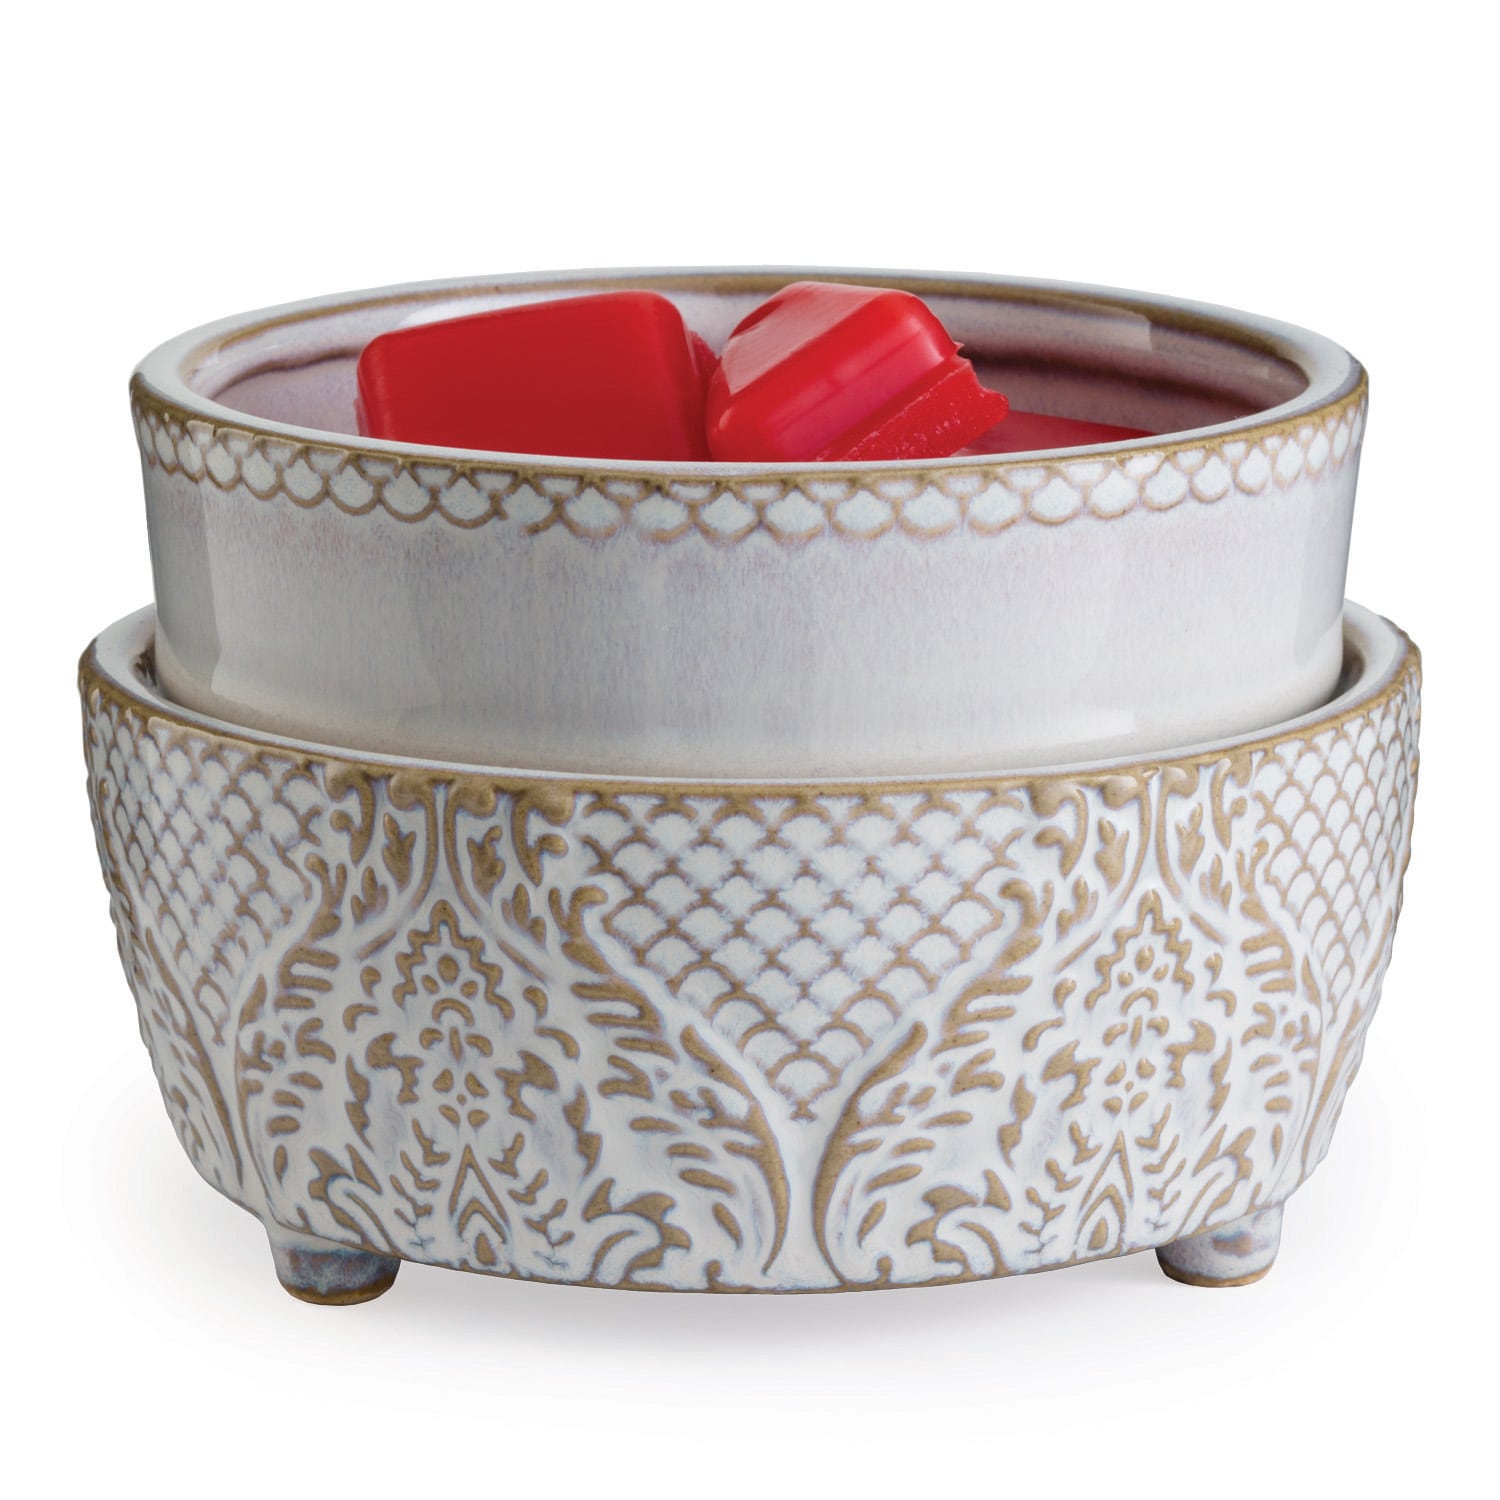 2-in-1 Fragrance Warmer for Candles and Wax Melts (Classic - Sandstone